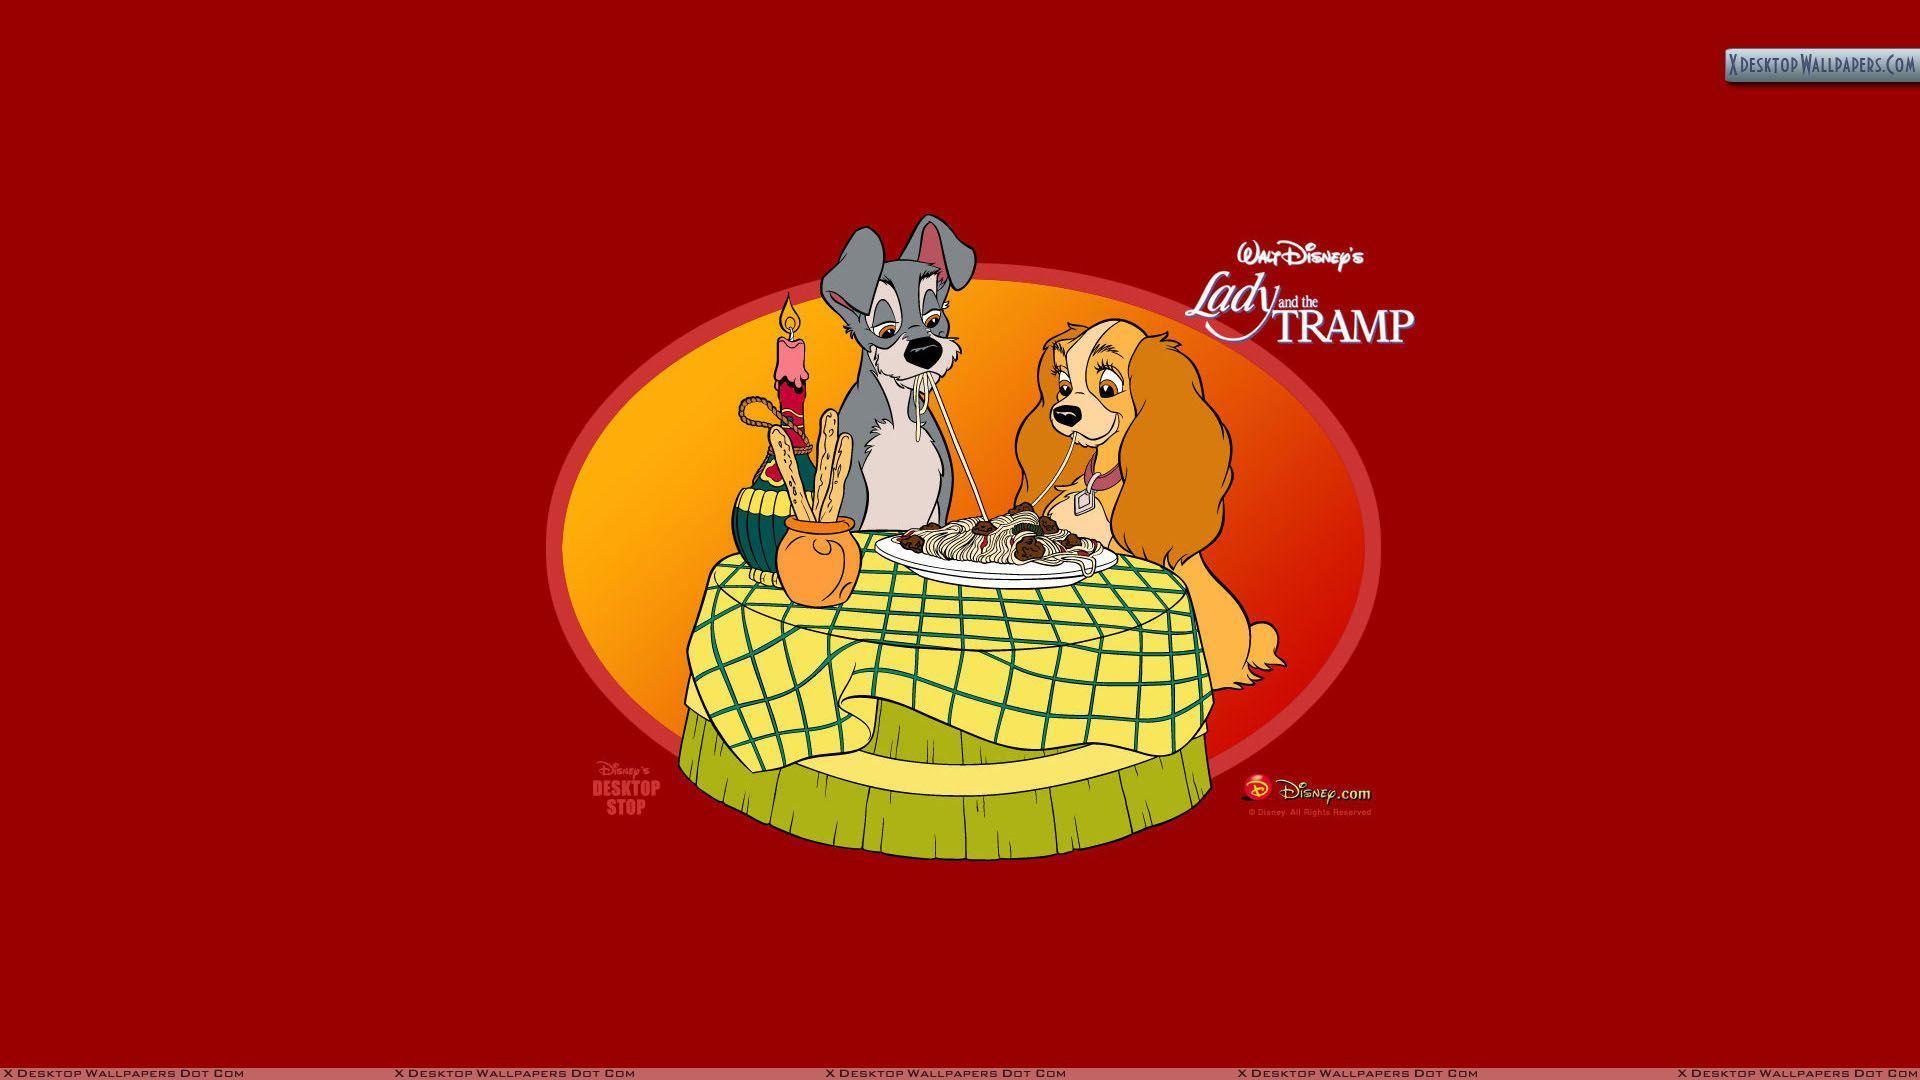 Lady And The Tramp Wallpaper, Photo & Image in HD